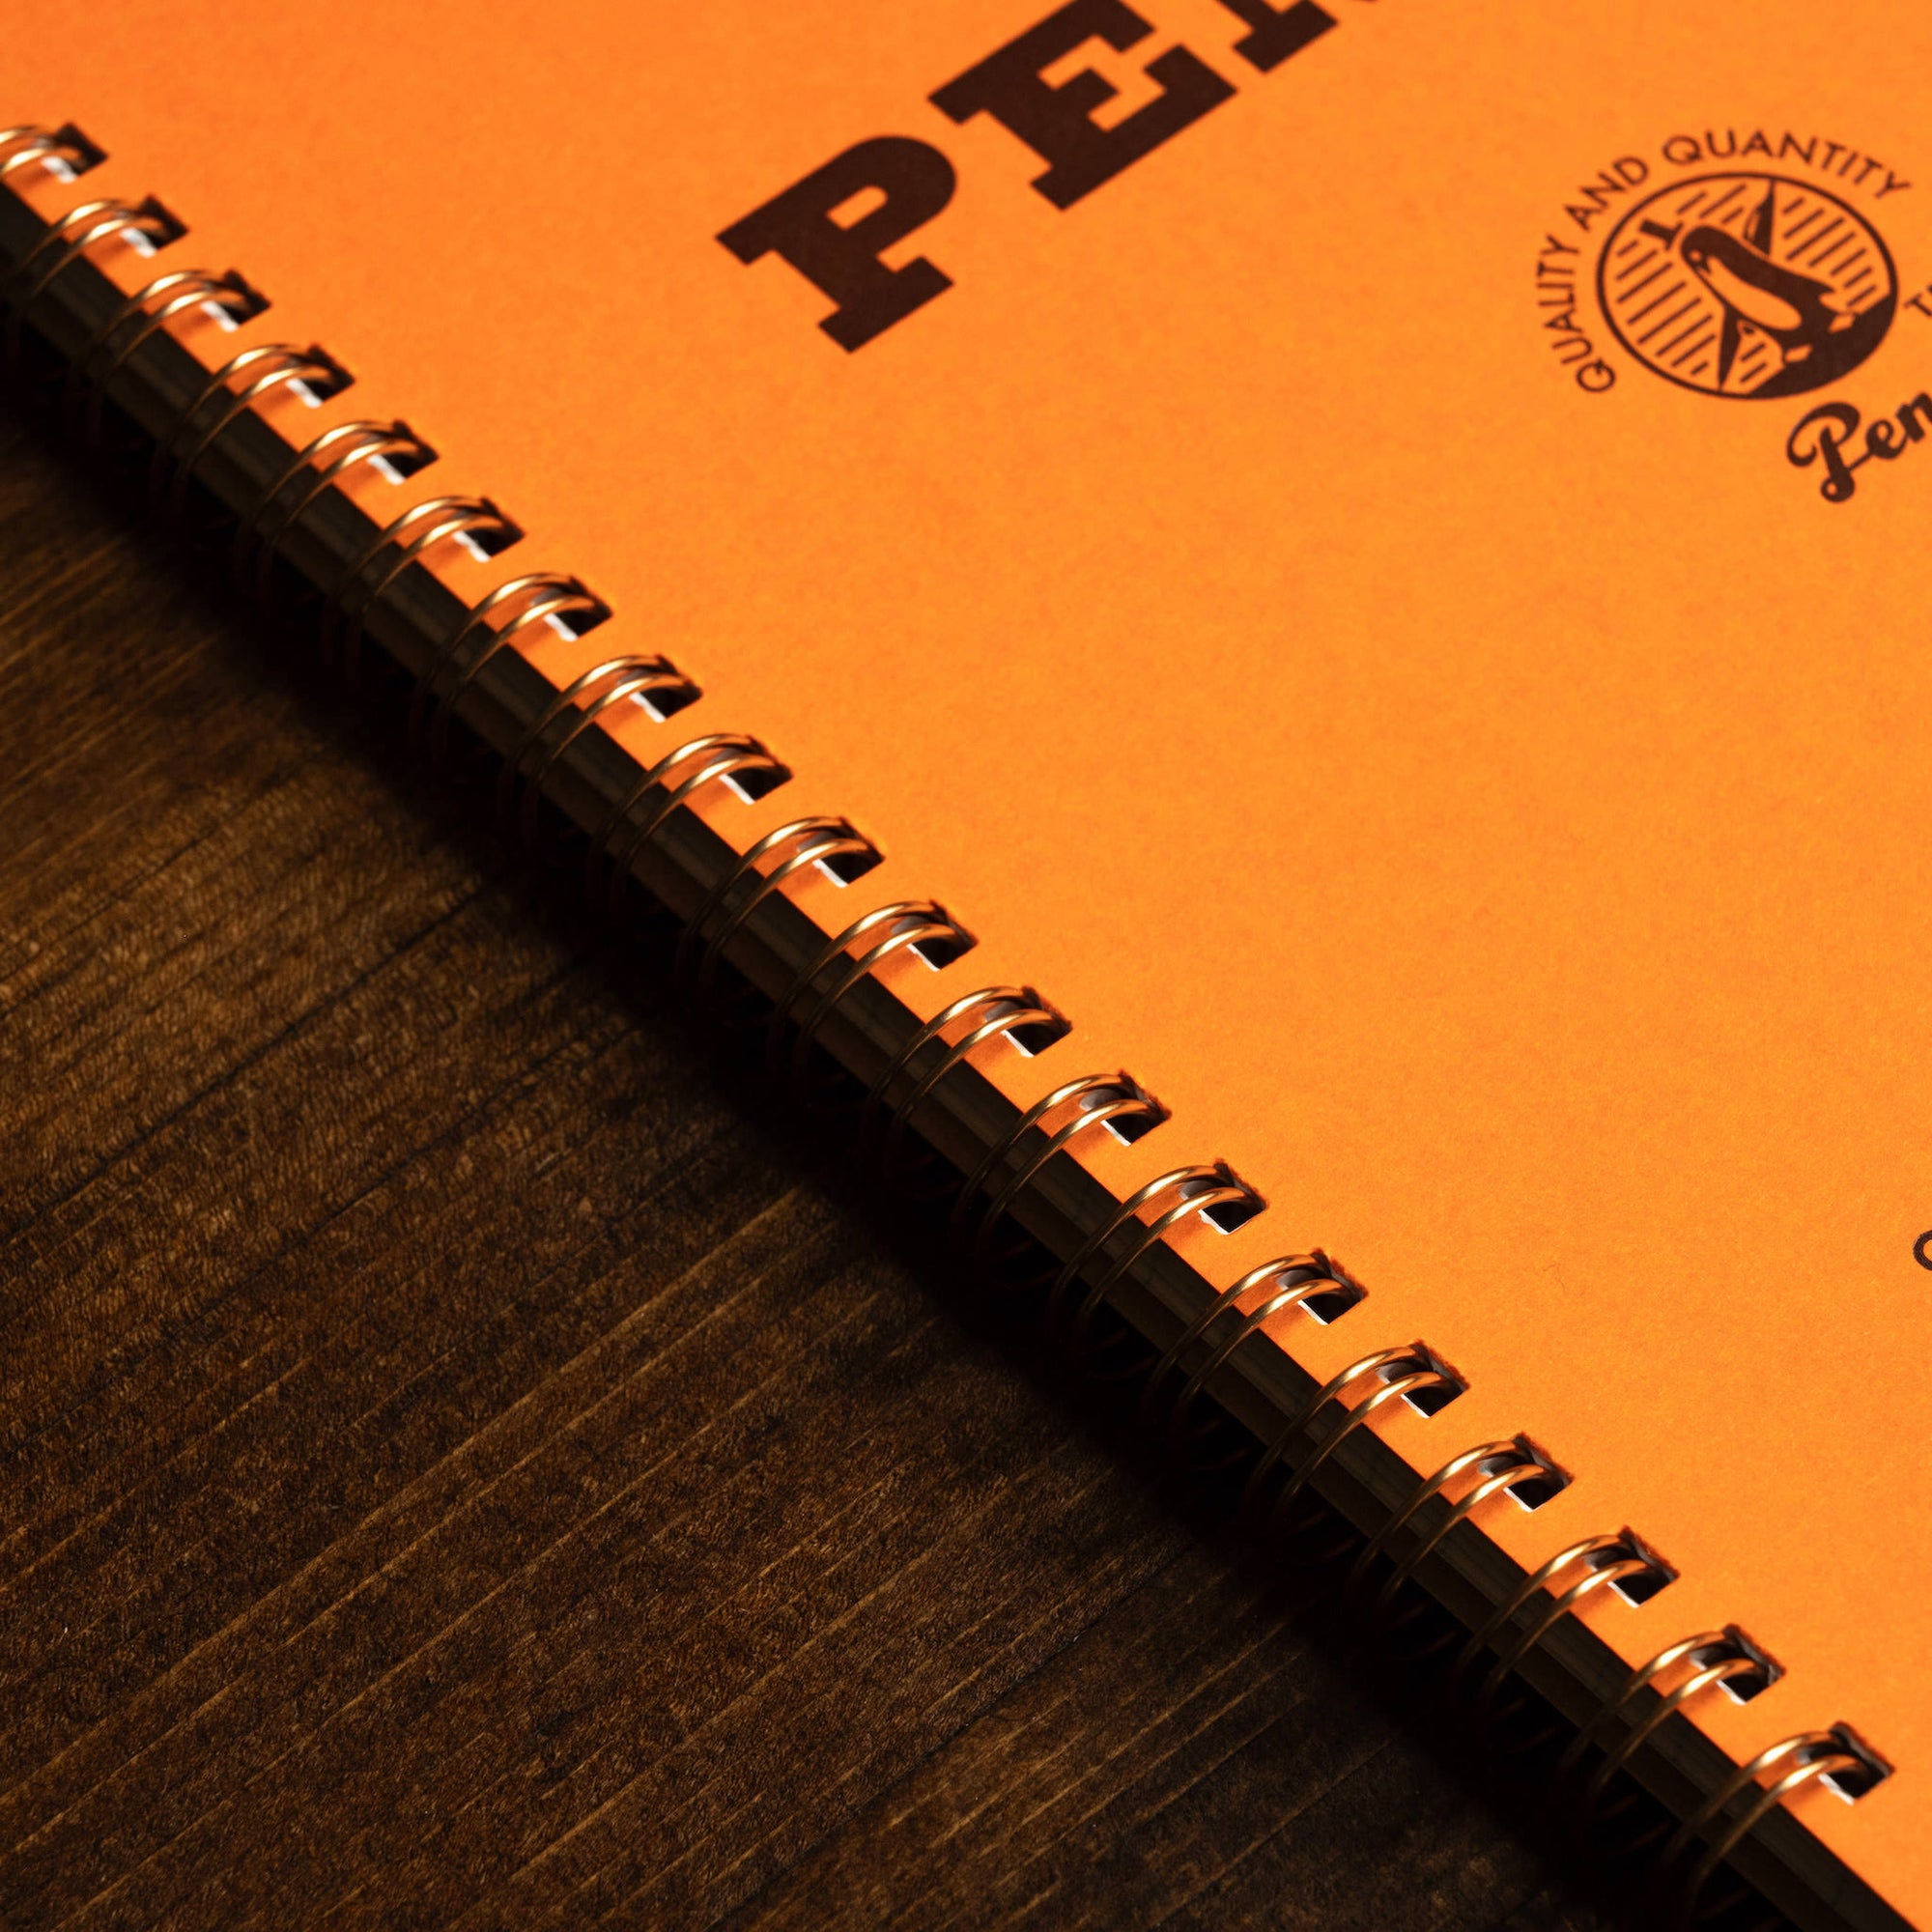 Penco Large Orange Coil Notebook front cover & coil close up 